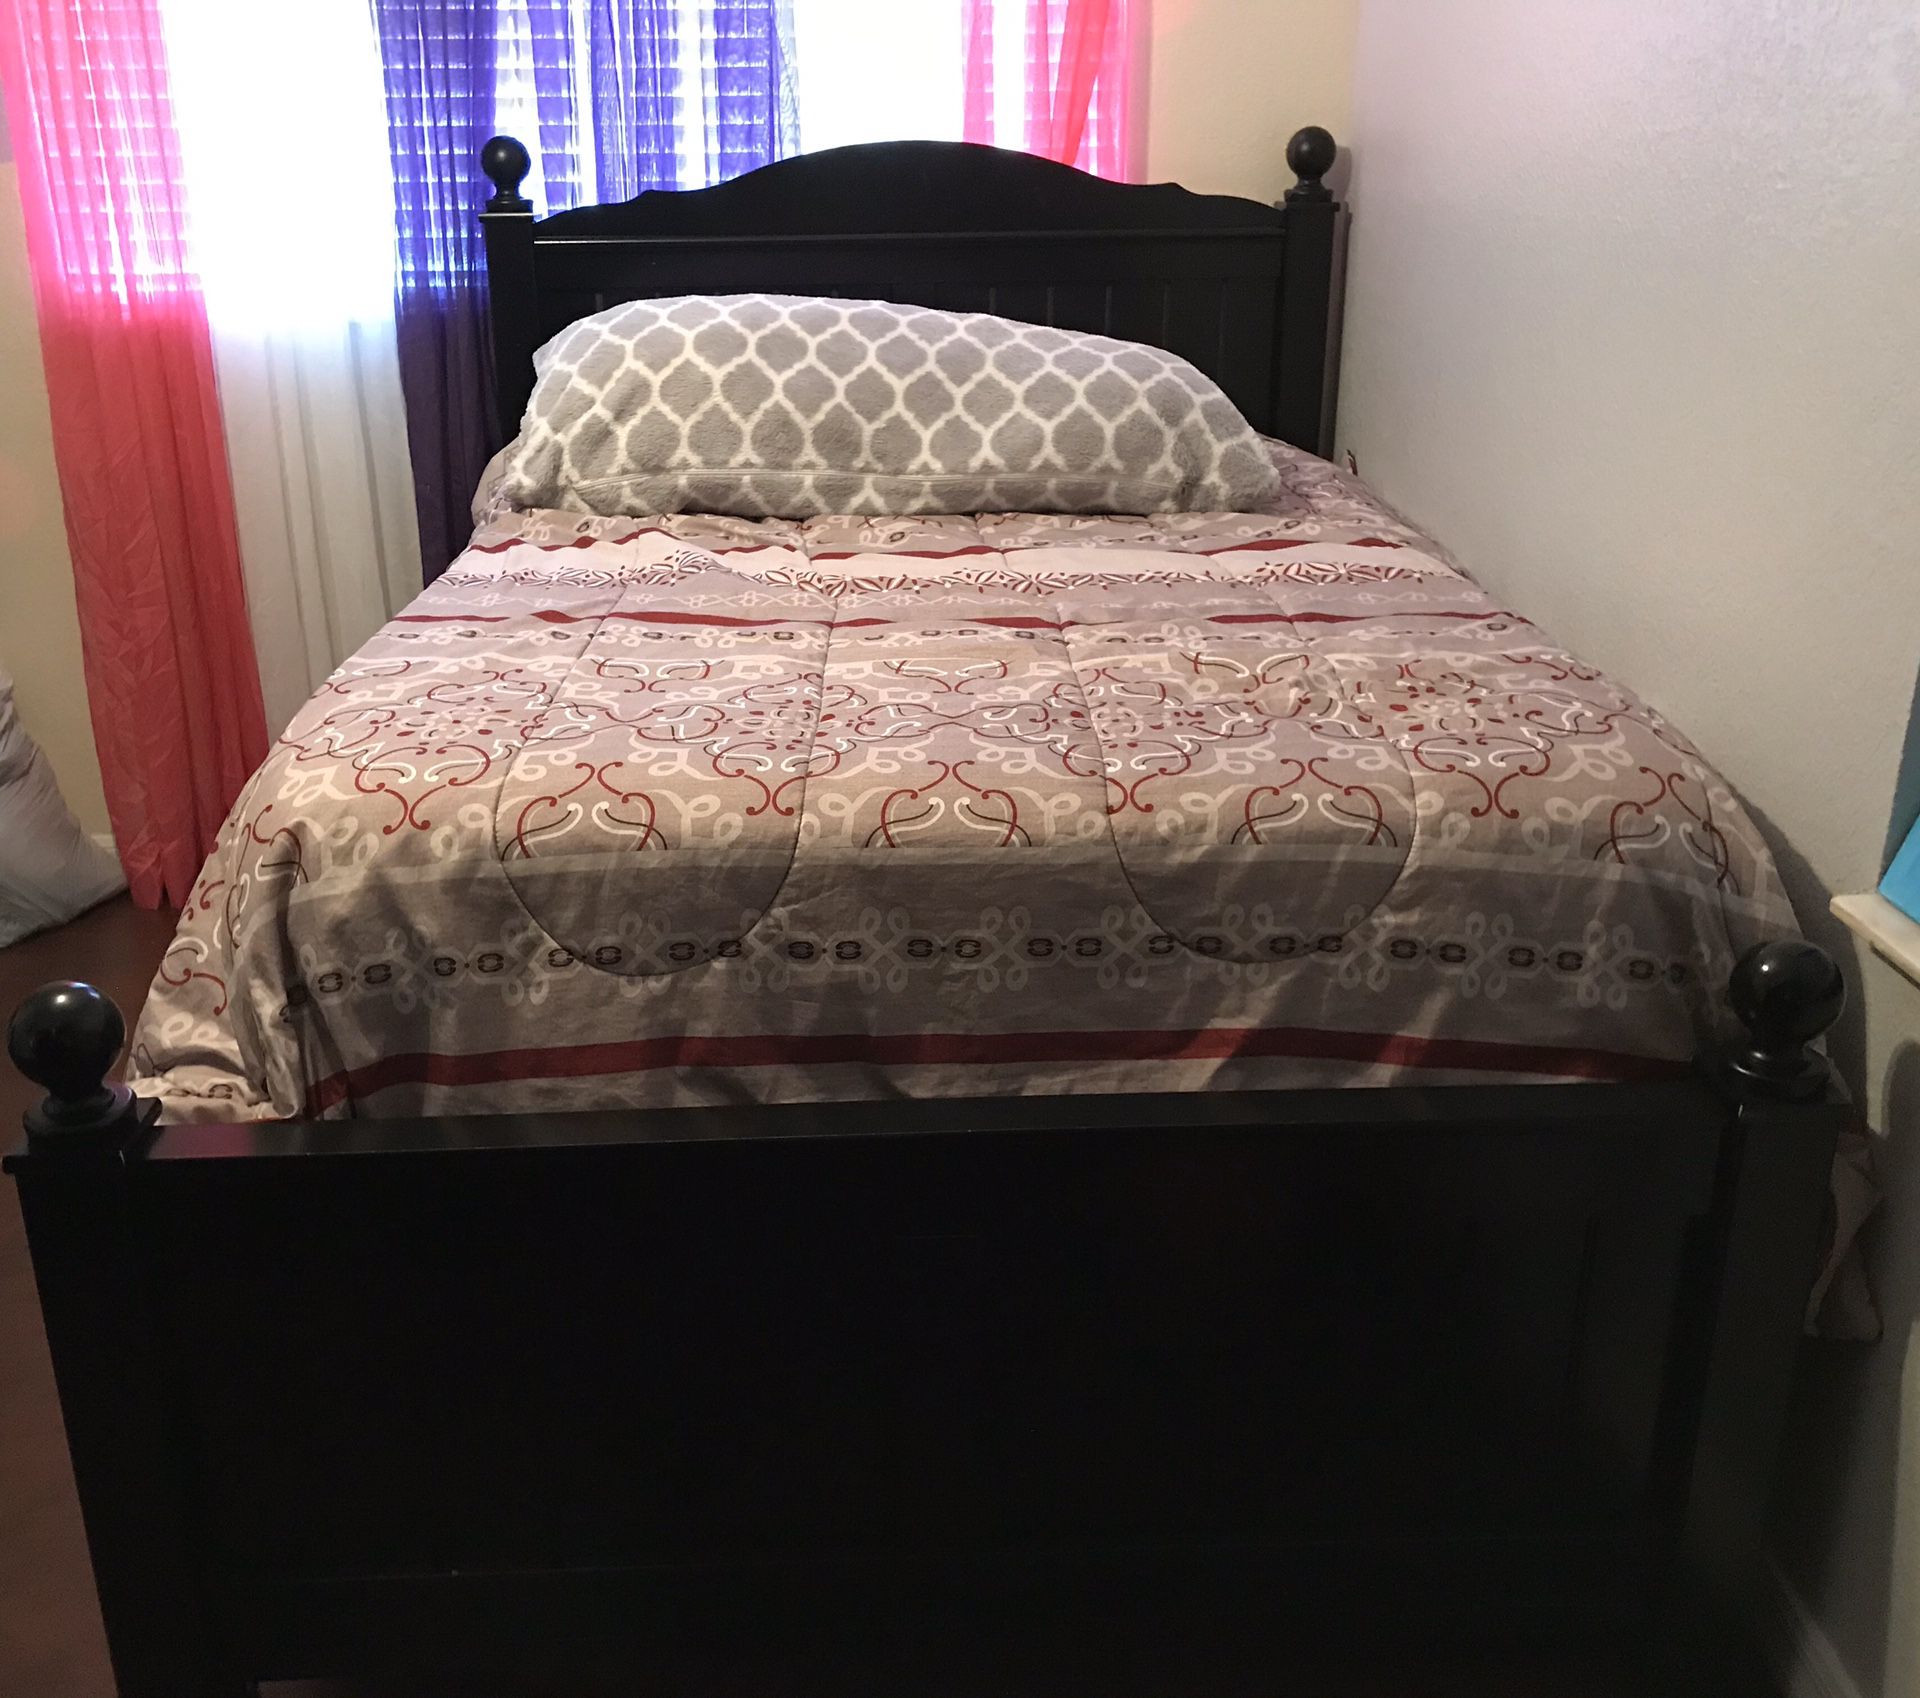 Full size bed and chest drawer